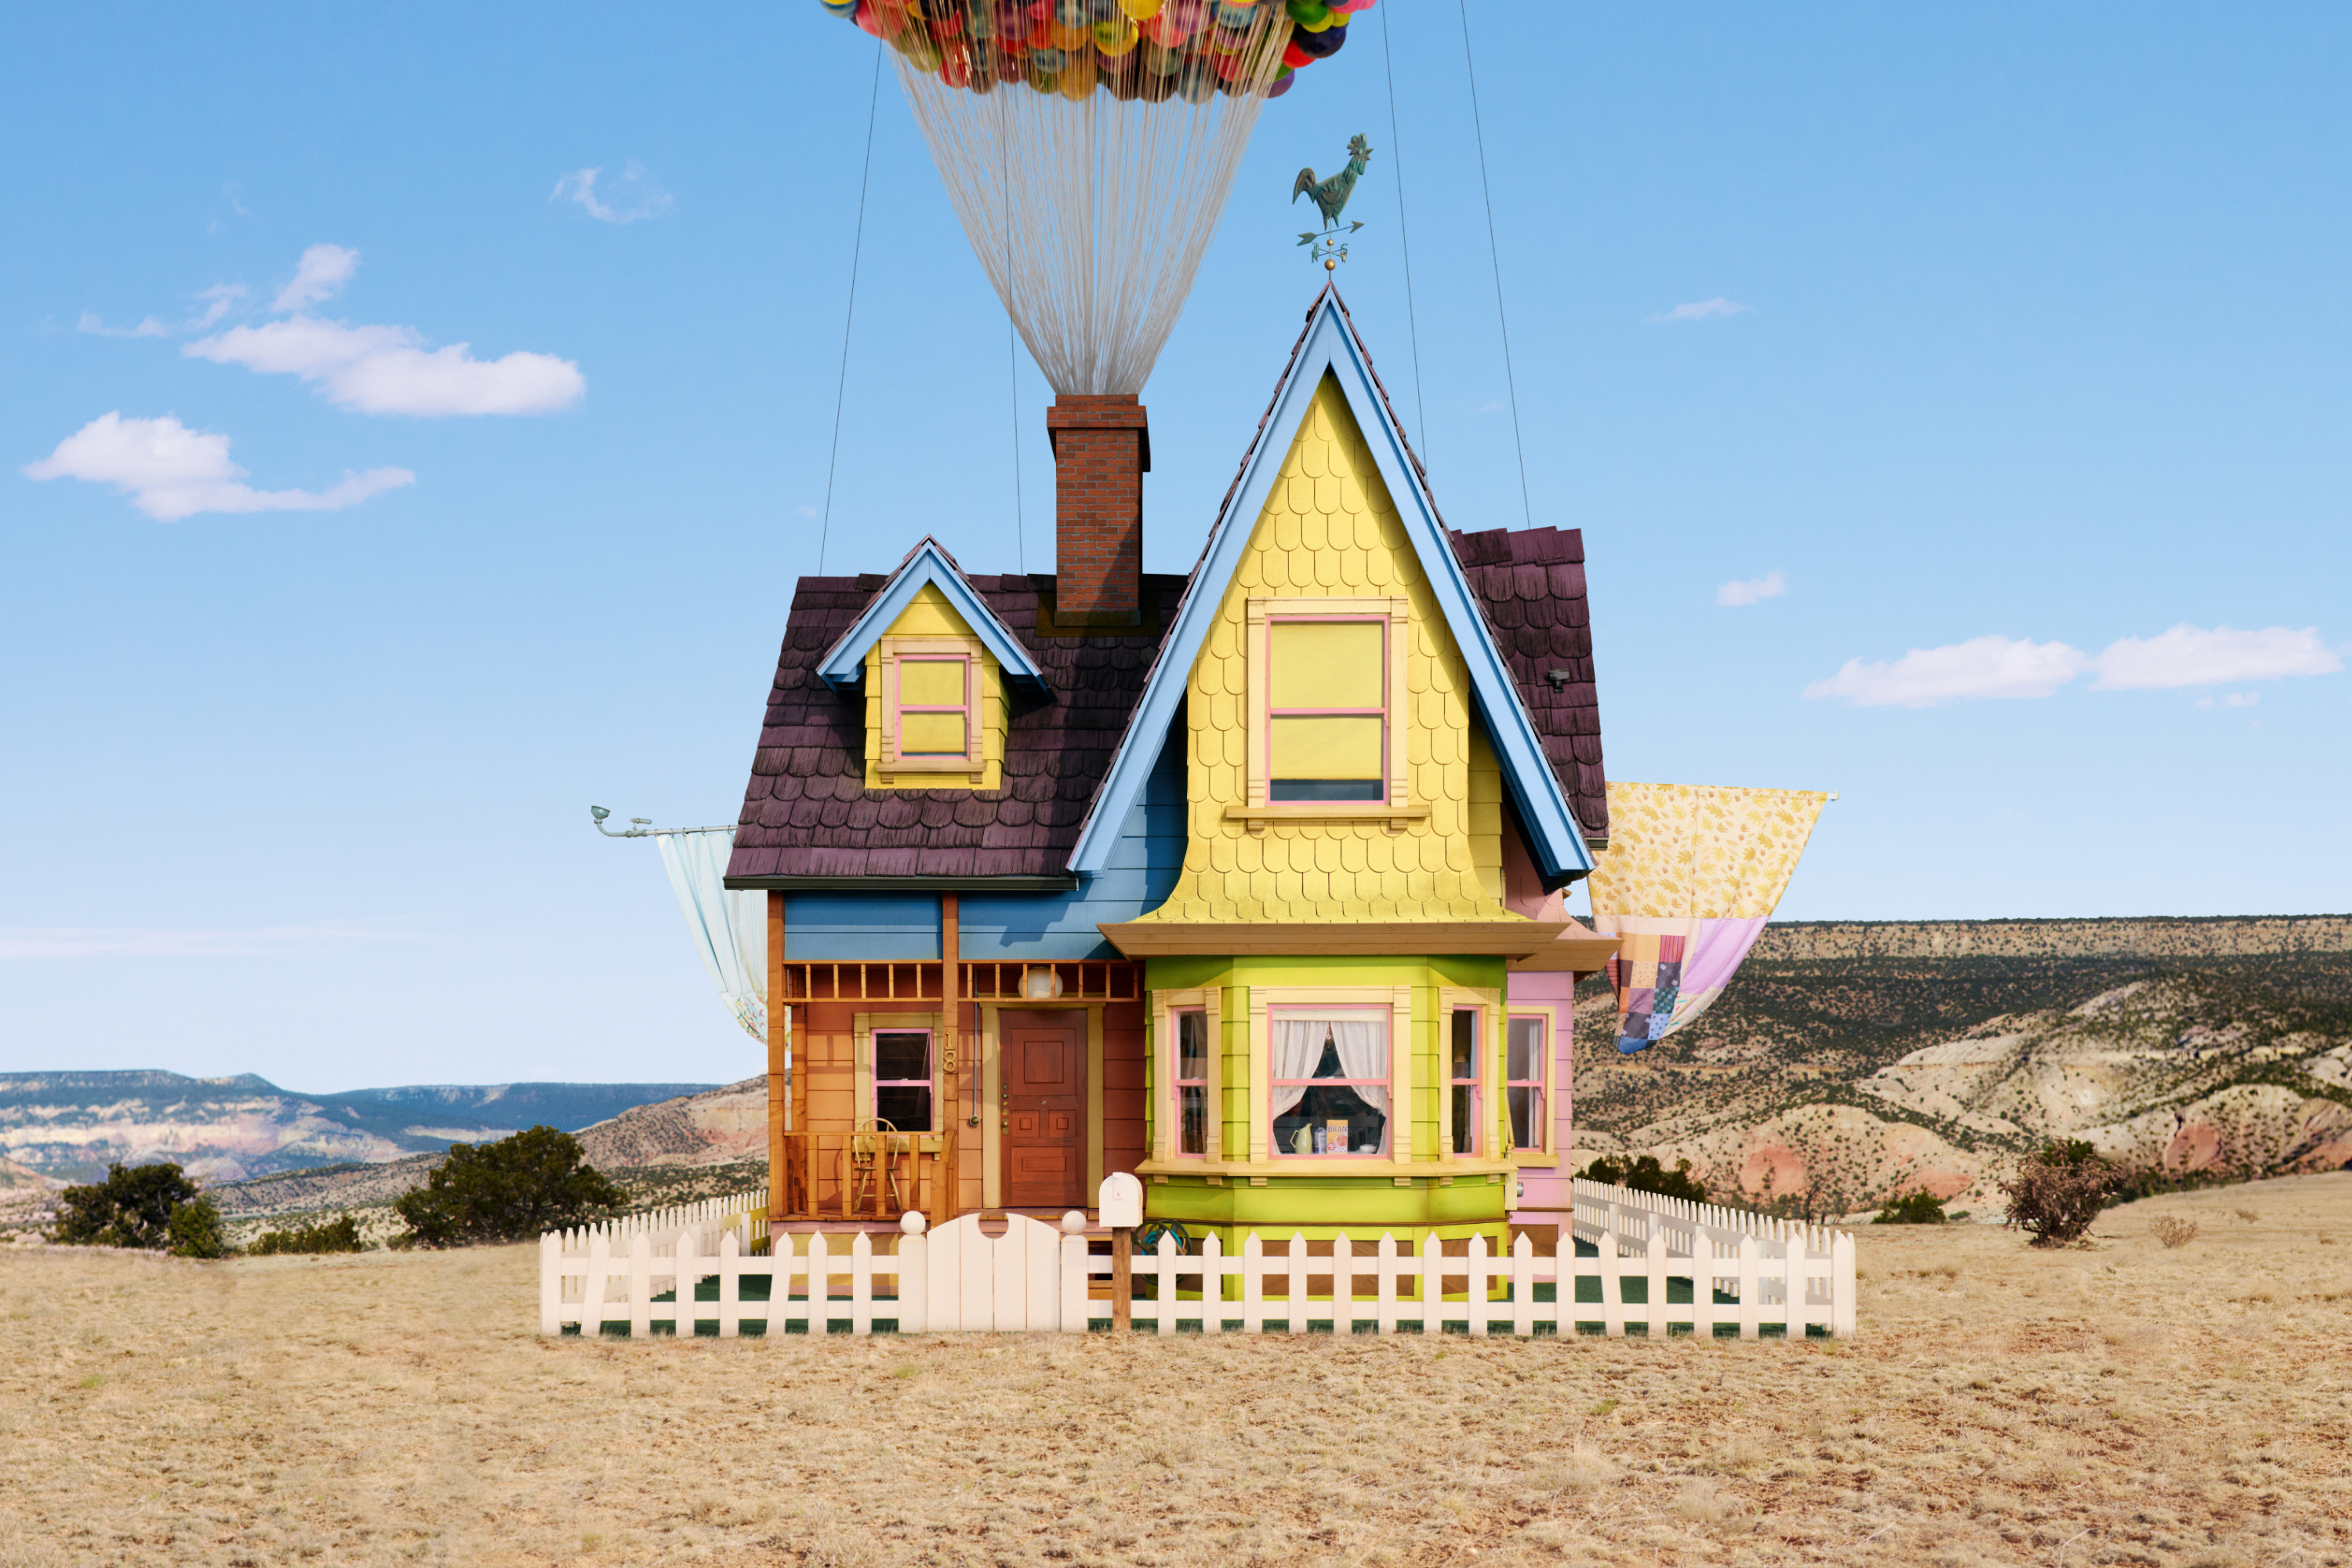 House floating with balloons over landscape, resembling scene from animated film &#x27;Up&#x27;